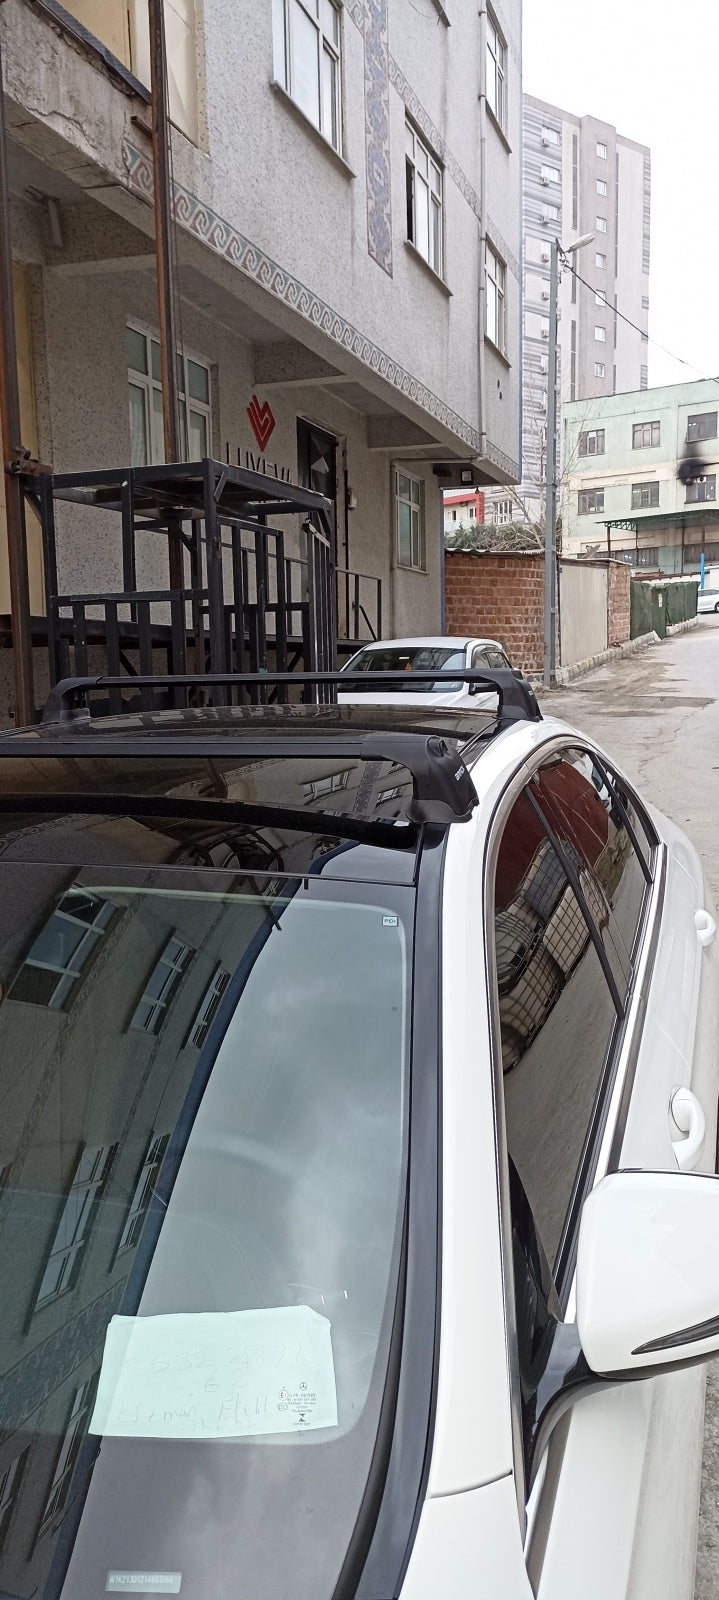 For Mercedes E Series W213 2016-Up Roof Rack System Carrier Cross Bars Aluminum Lockable High Quality of Metal Bracket Silver-8